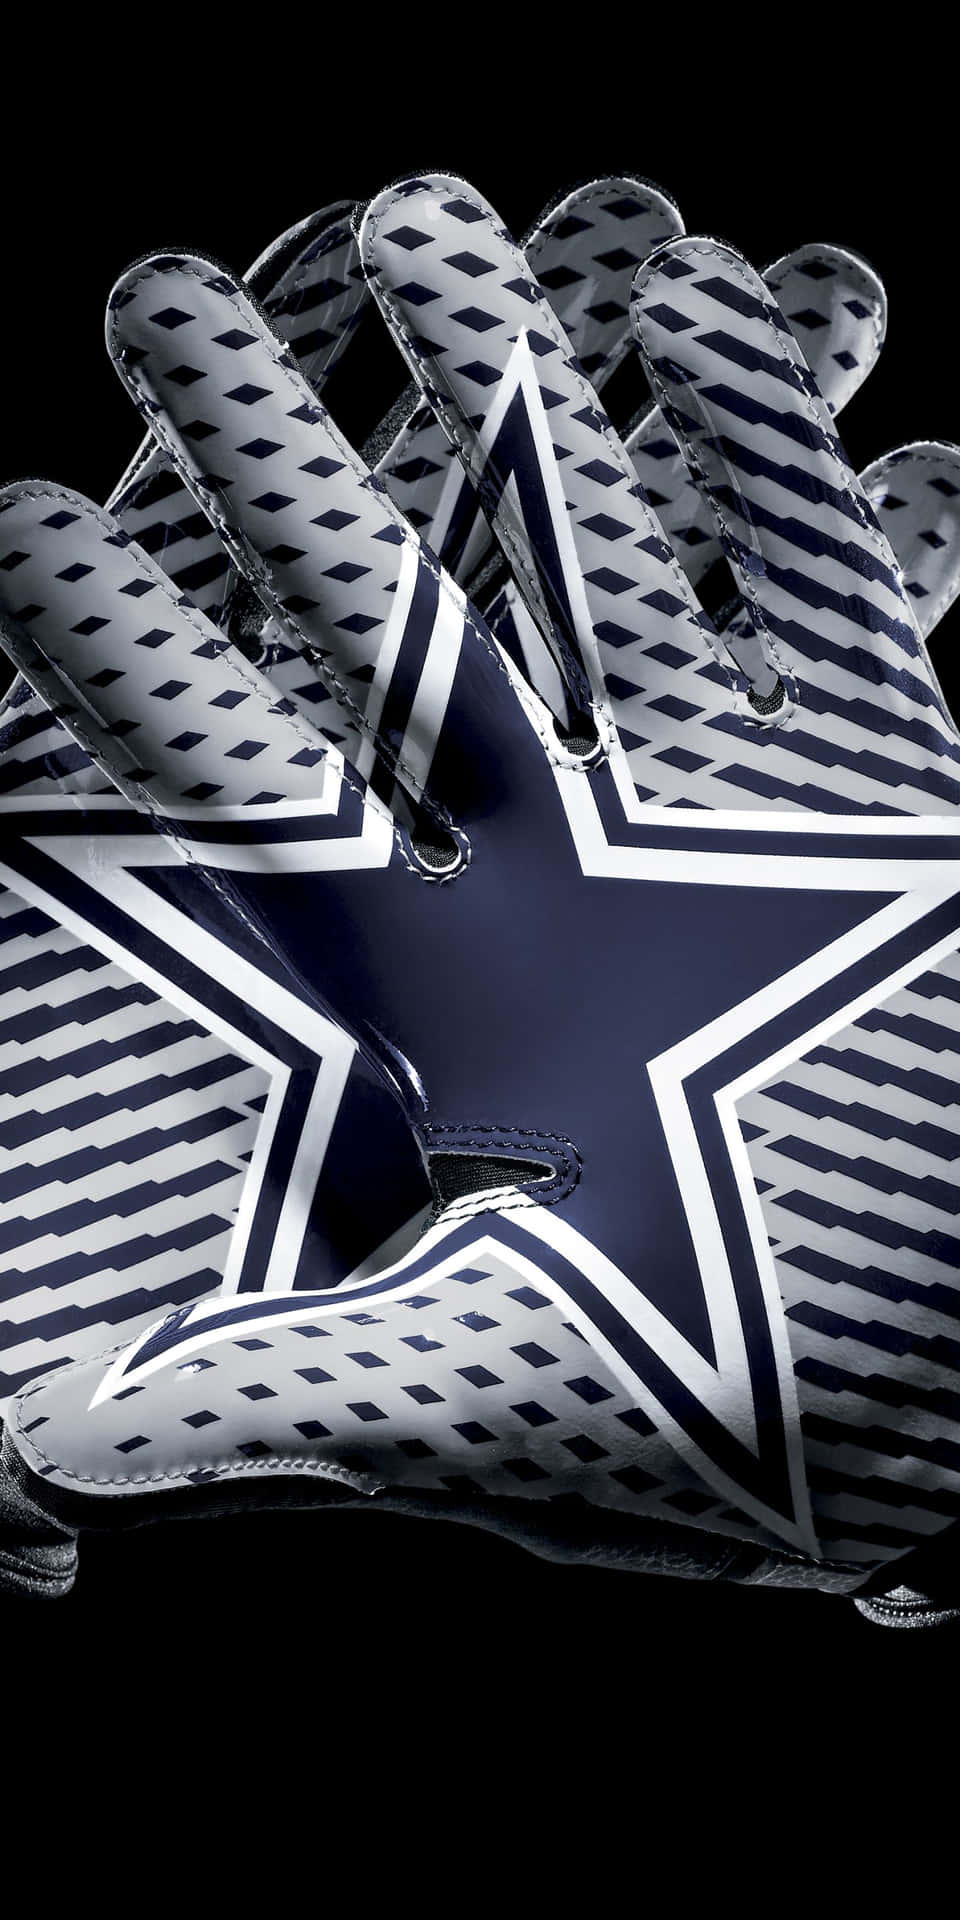 Dallas Cowboys Phone Catching Gloves Background